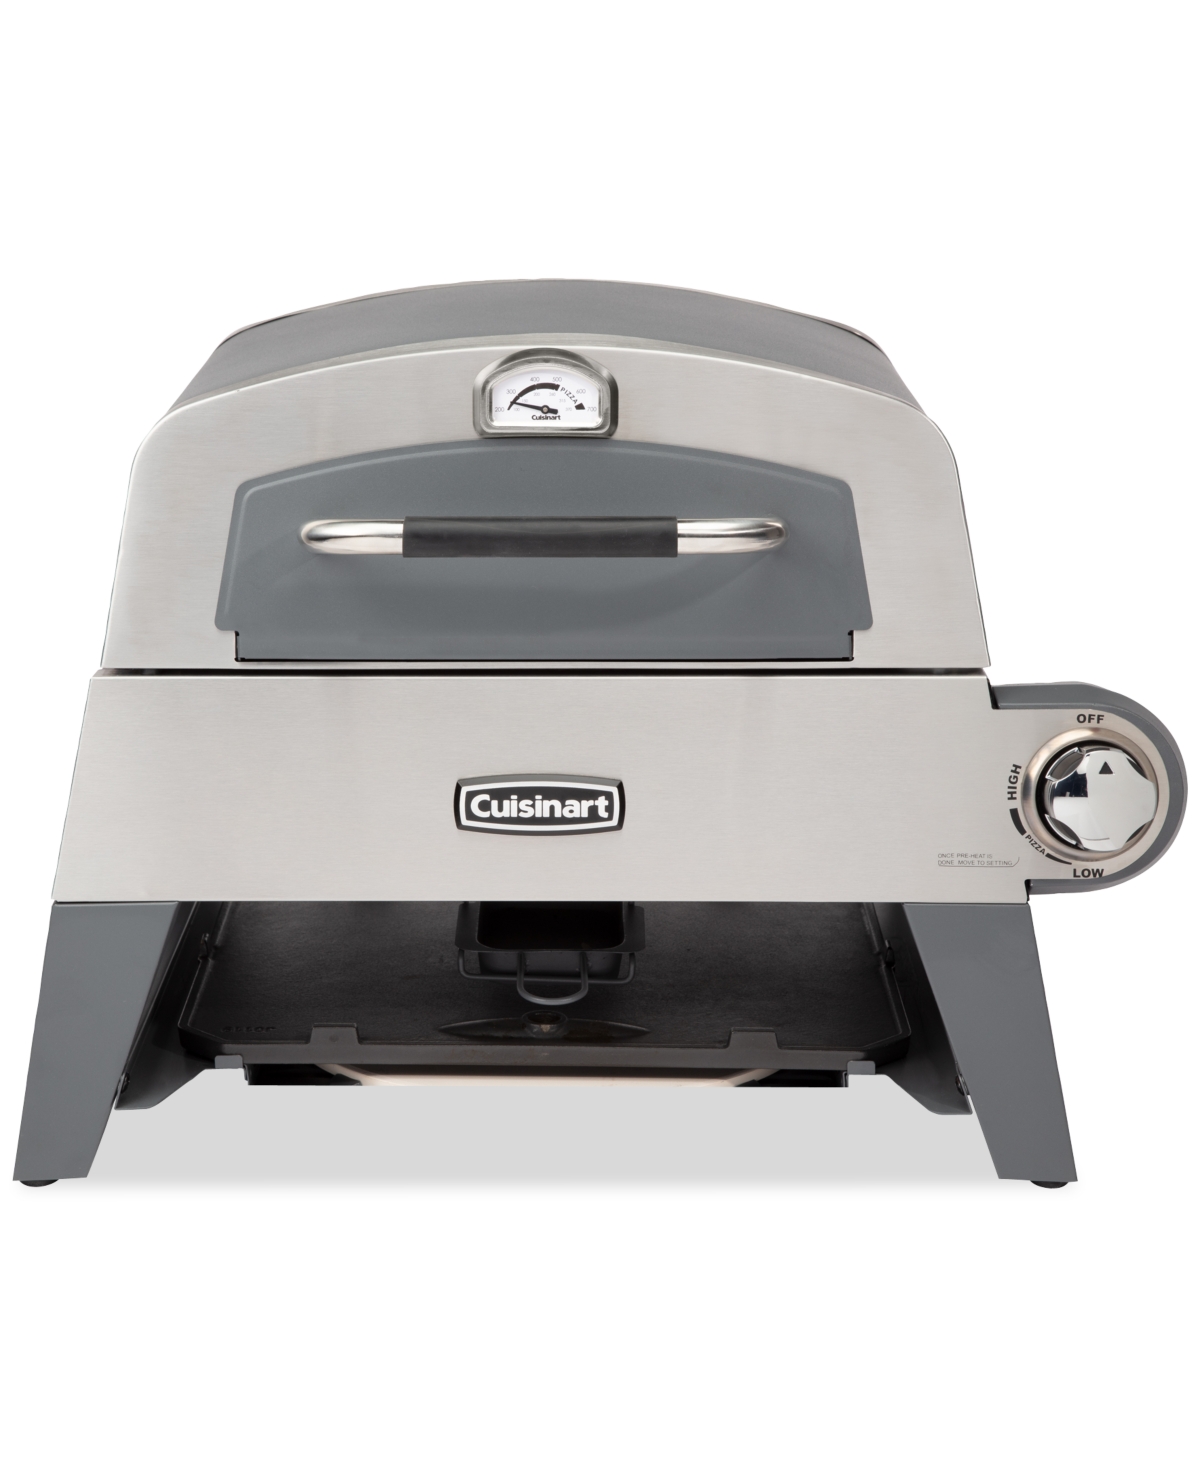 Cuisinart Cgg-403 3-in-1 Pizza Oven, Griddle, & Cast Iron Grill In Stainless Steel,grey